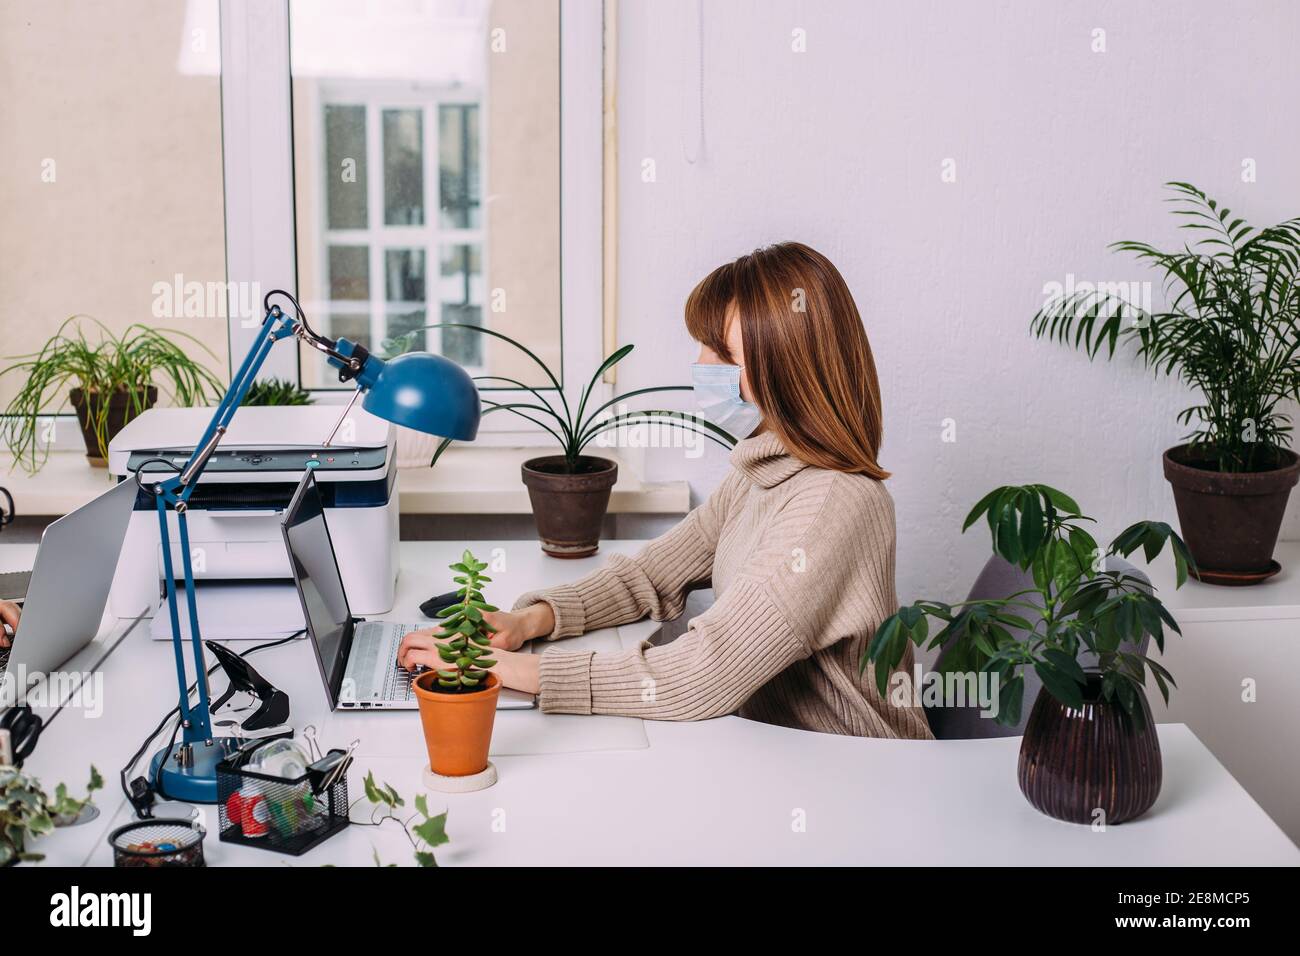 Beautiful business woman with a medical protective face mask working in a light office surrounded by plants. Stock Photo